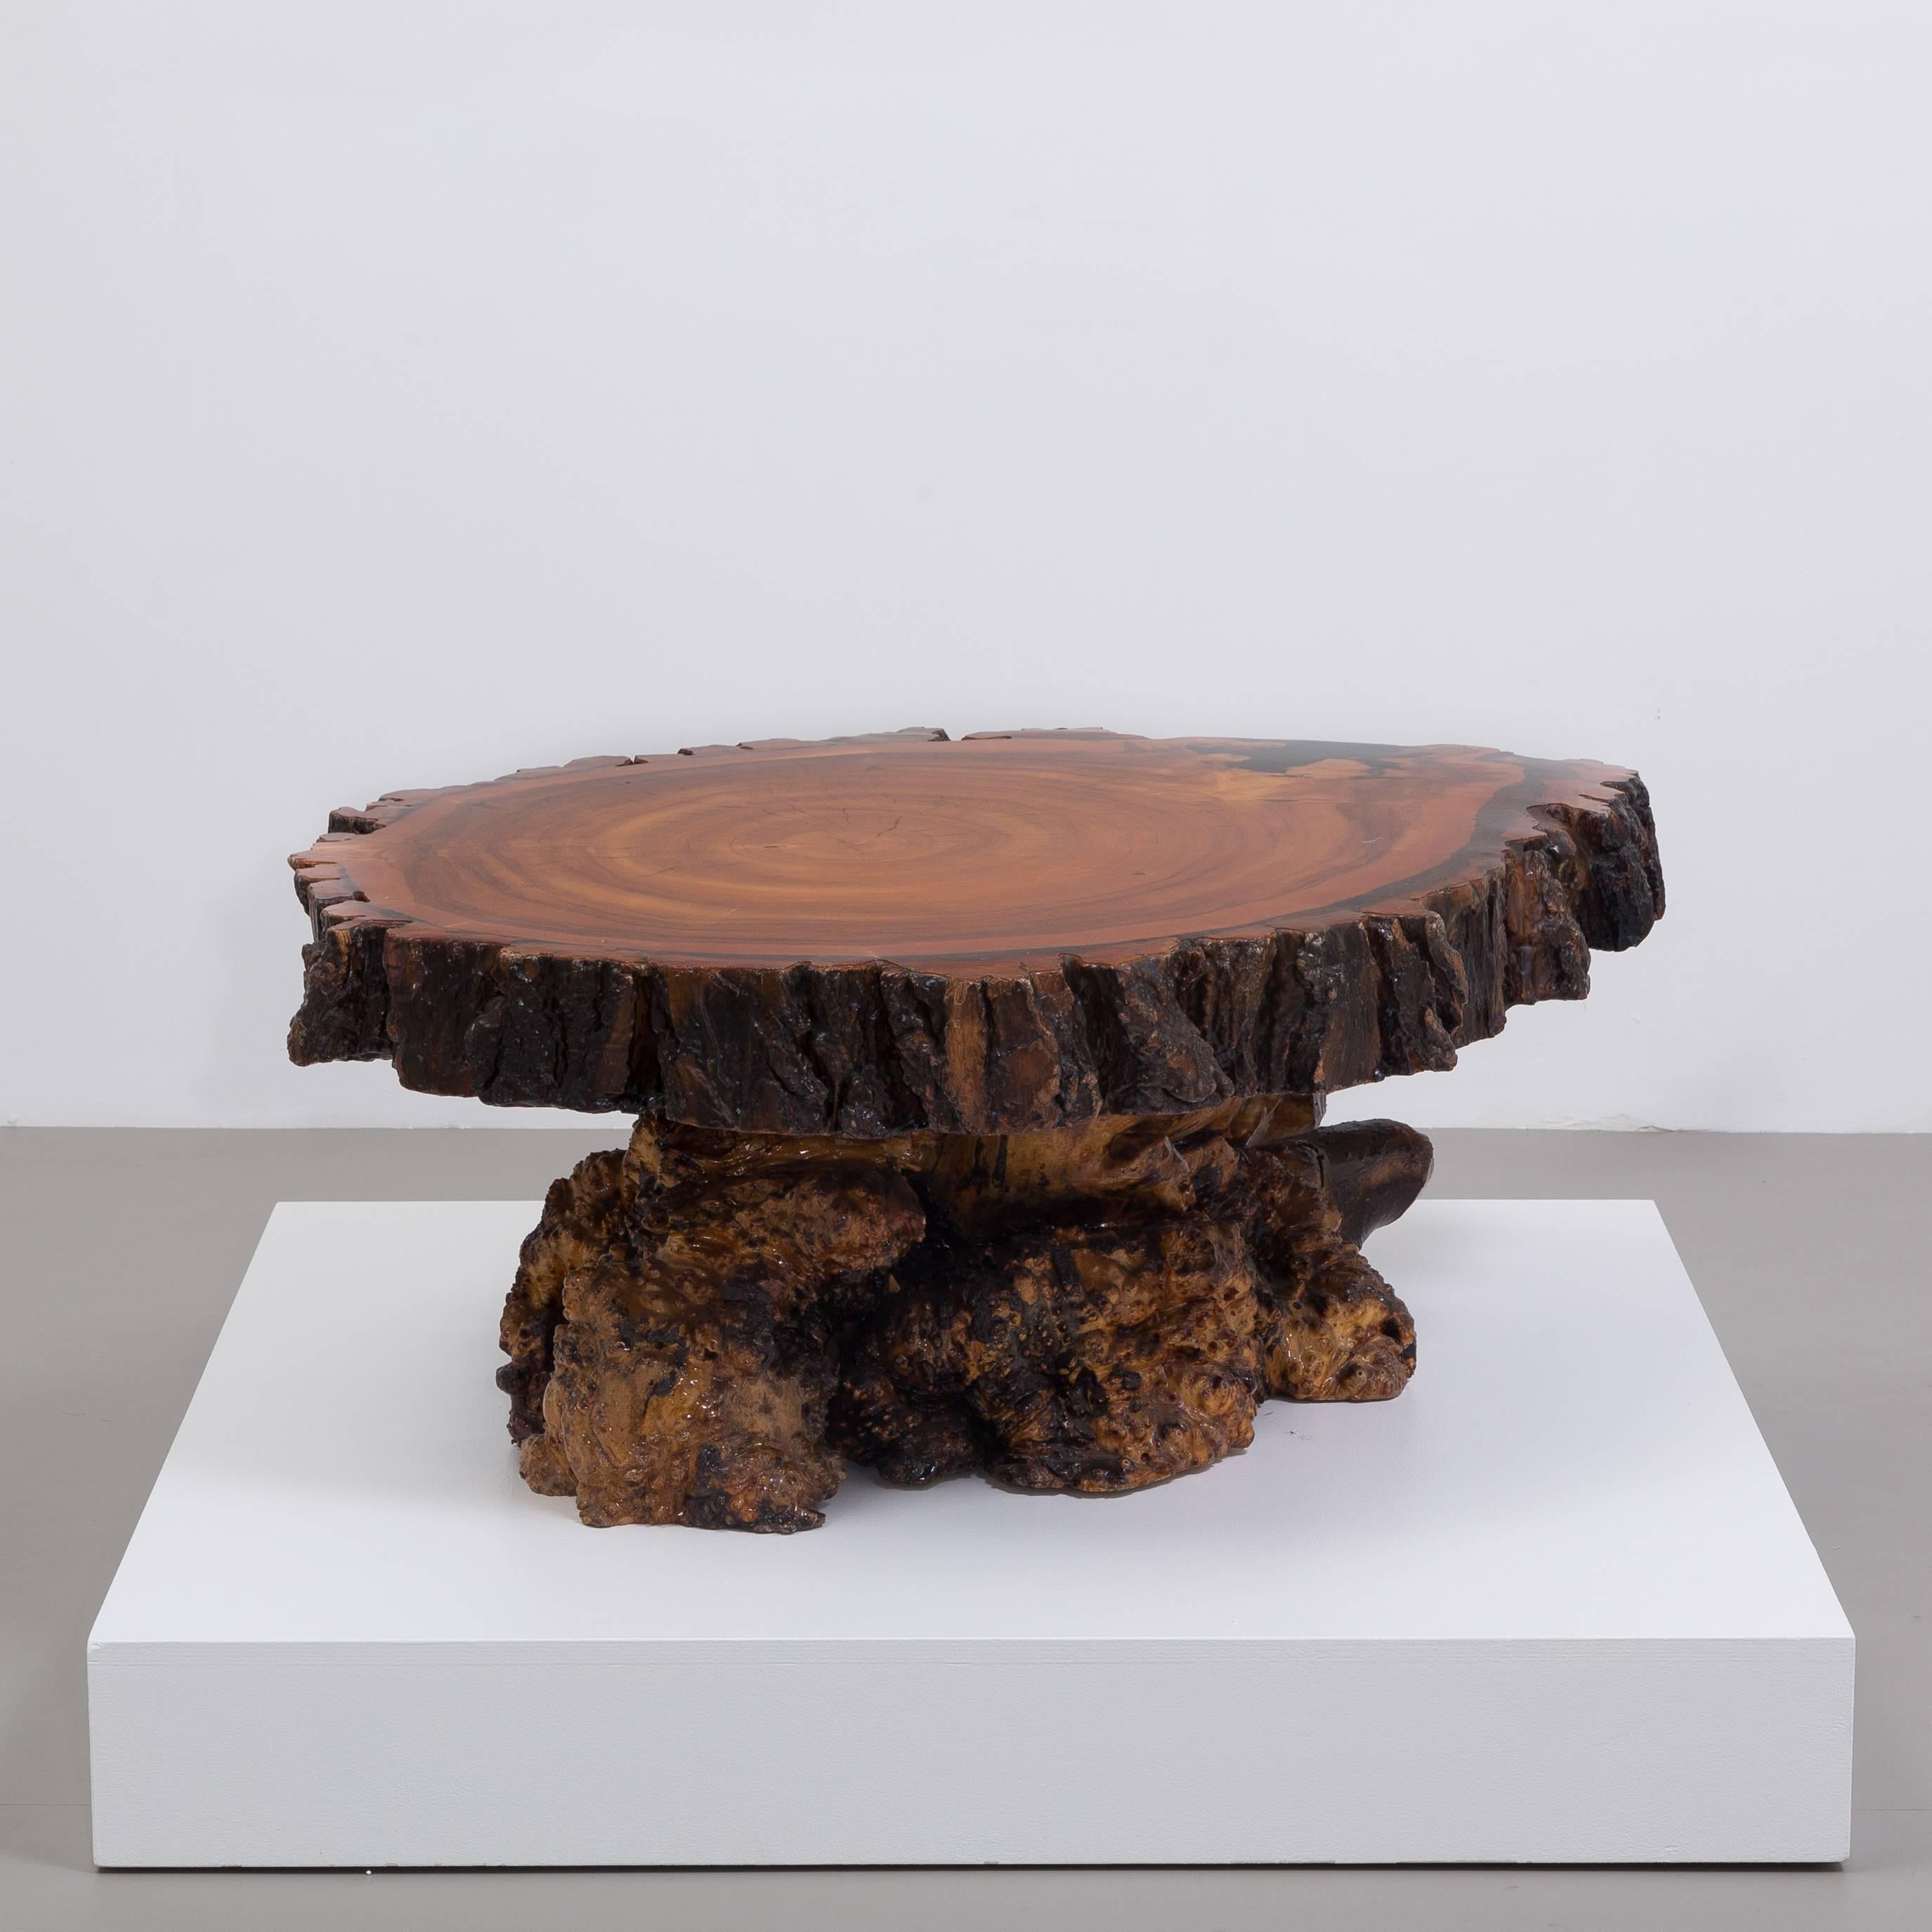 A Californian redwood coffee table, 1960s

Price includes 20% VAT which is removed for items shipped outside the EU.